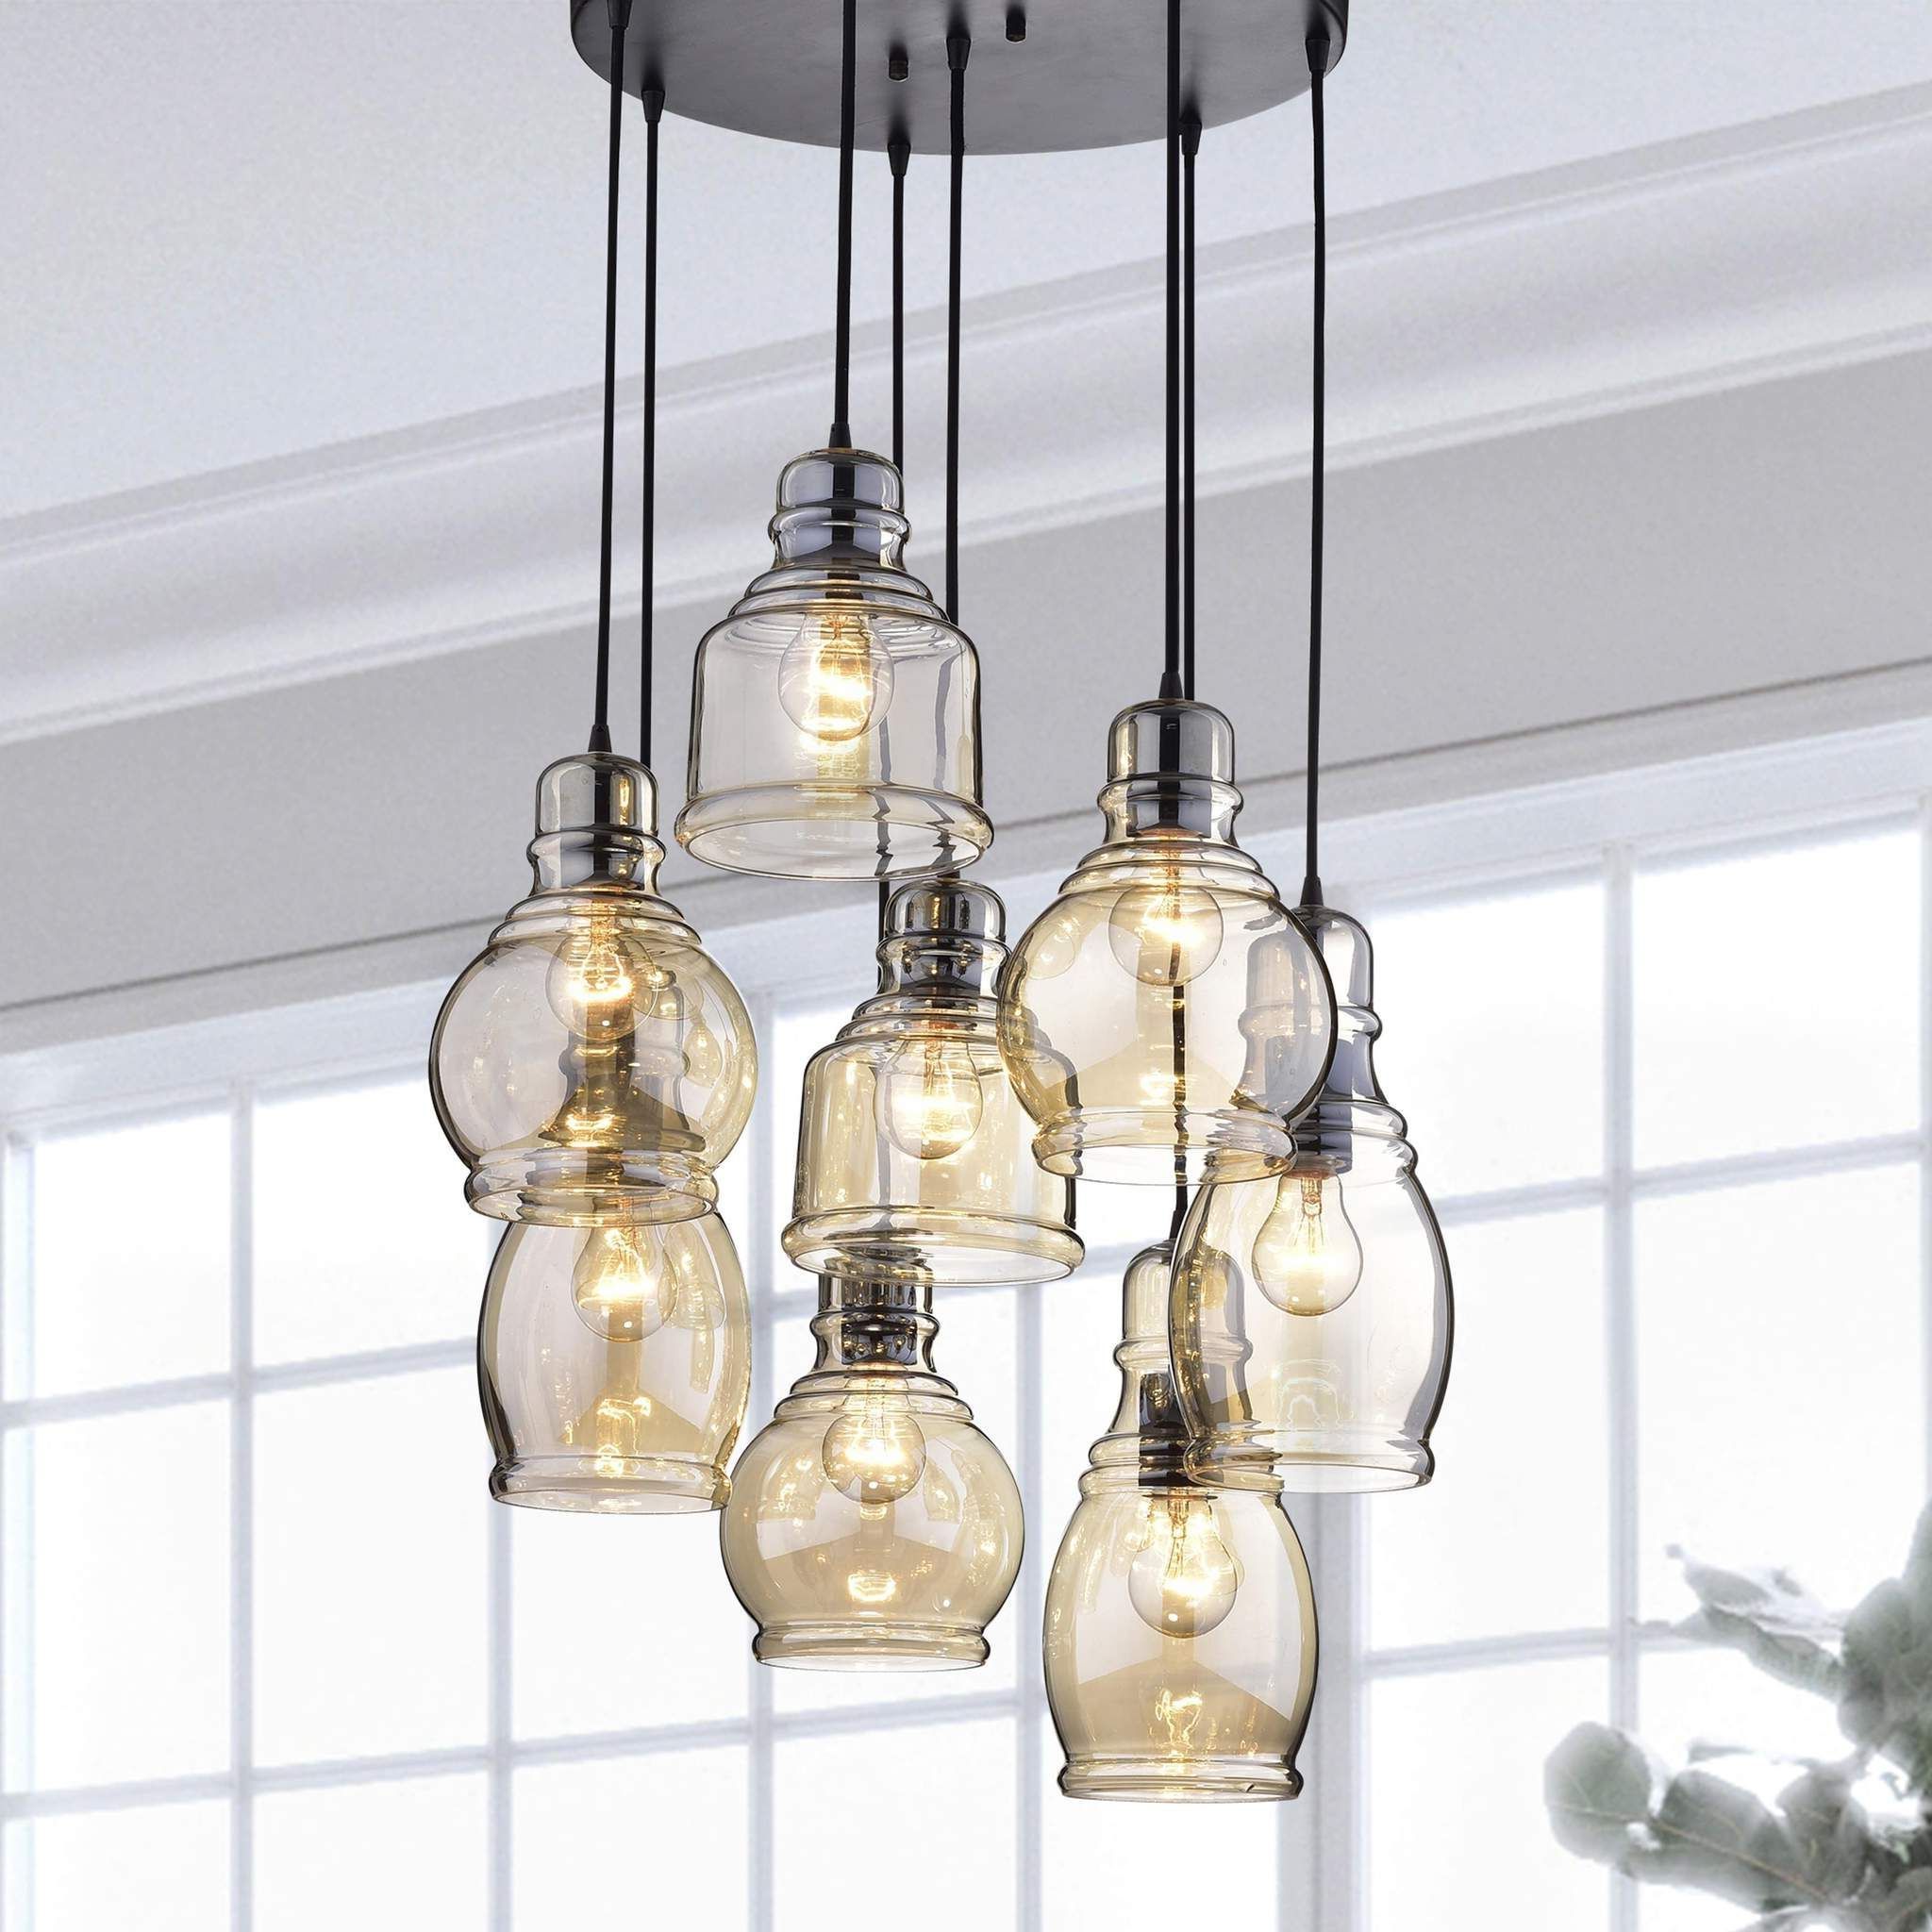 Pruett Cognac Glass 8 Light Cluster Pendants Within Most Recently Released Foyer Lighting Boho – Antique Black Amber Tinted Cluster (View 9 of 25)